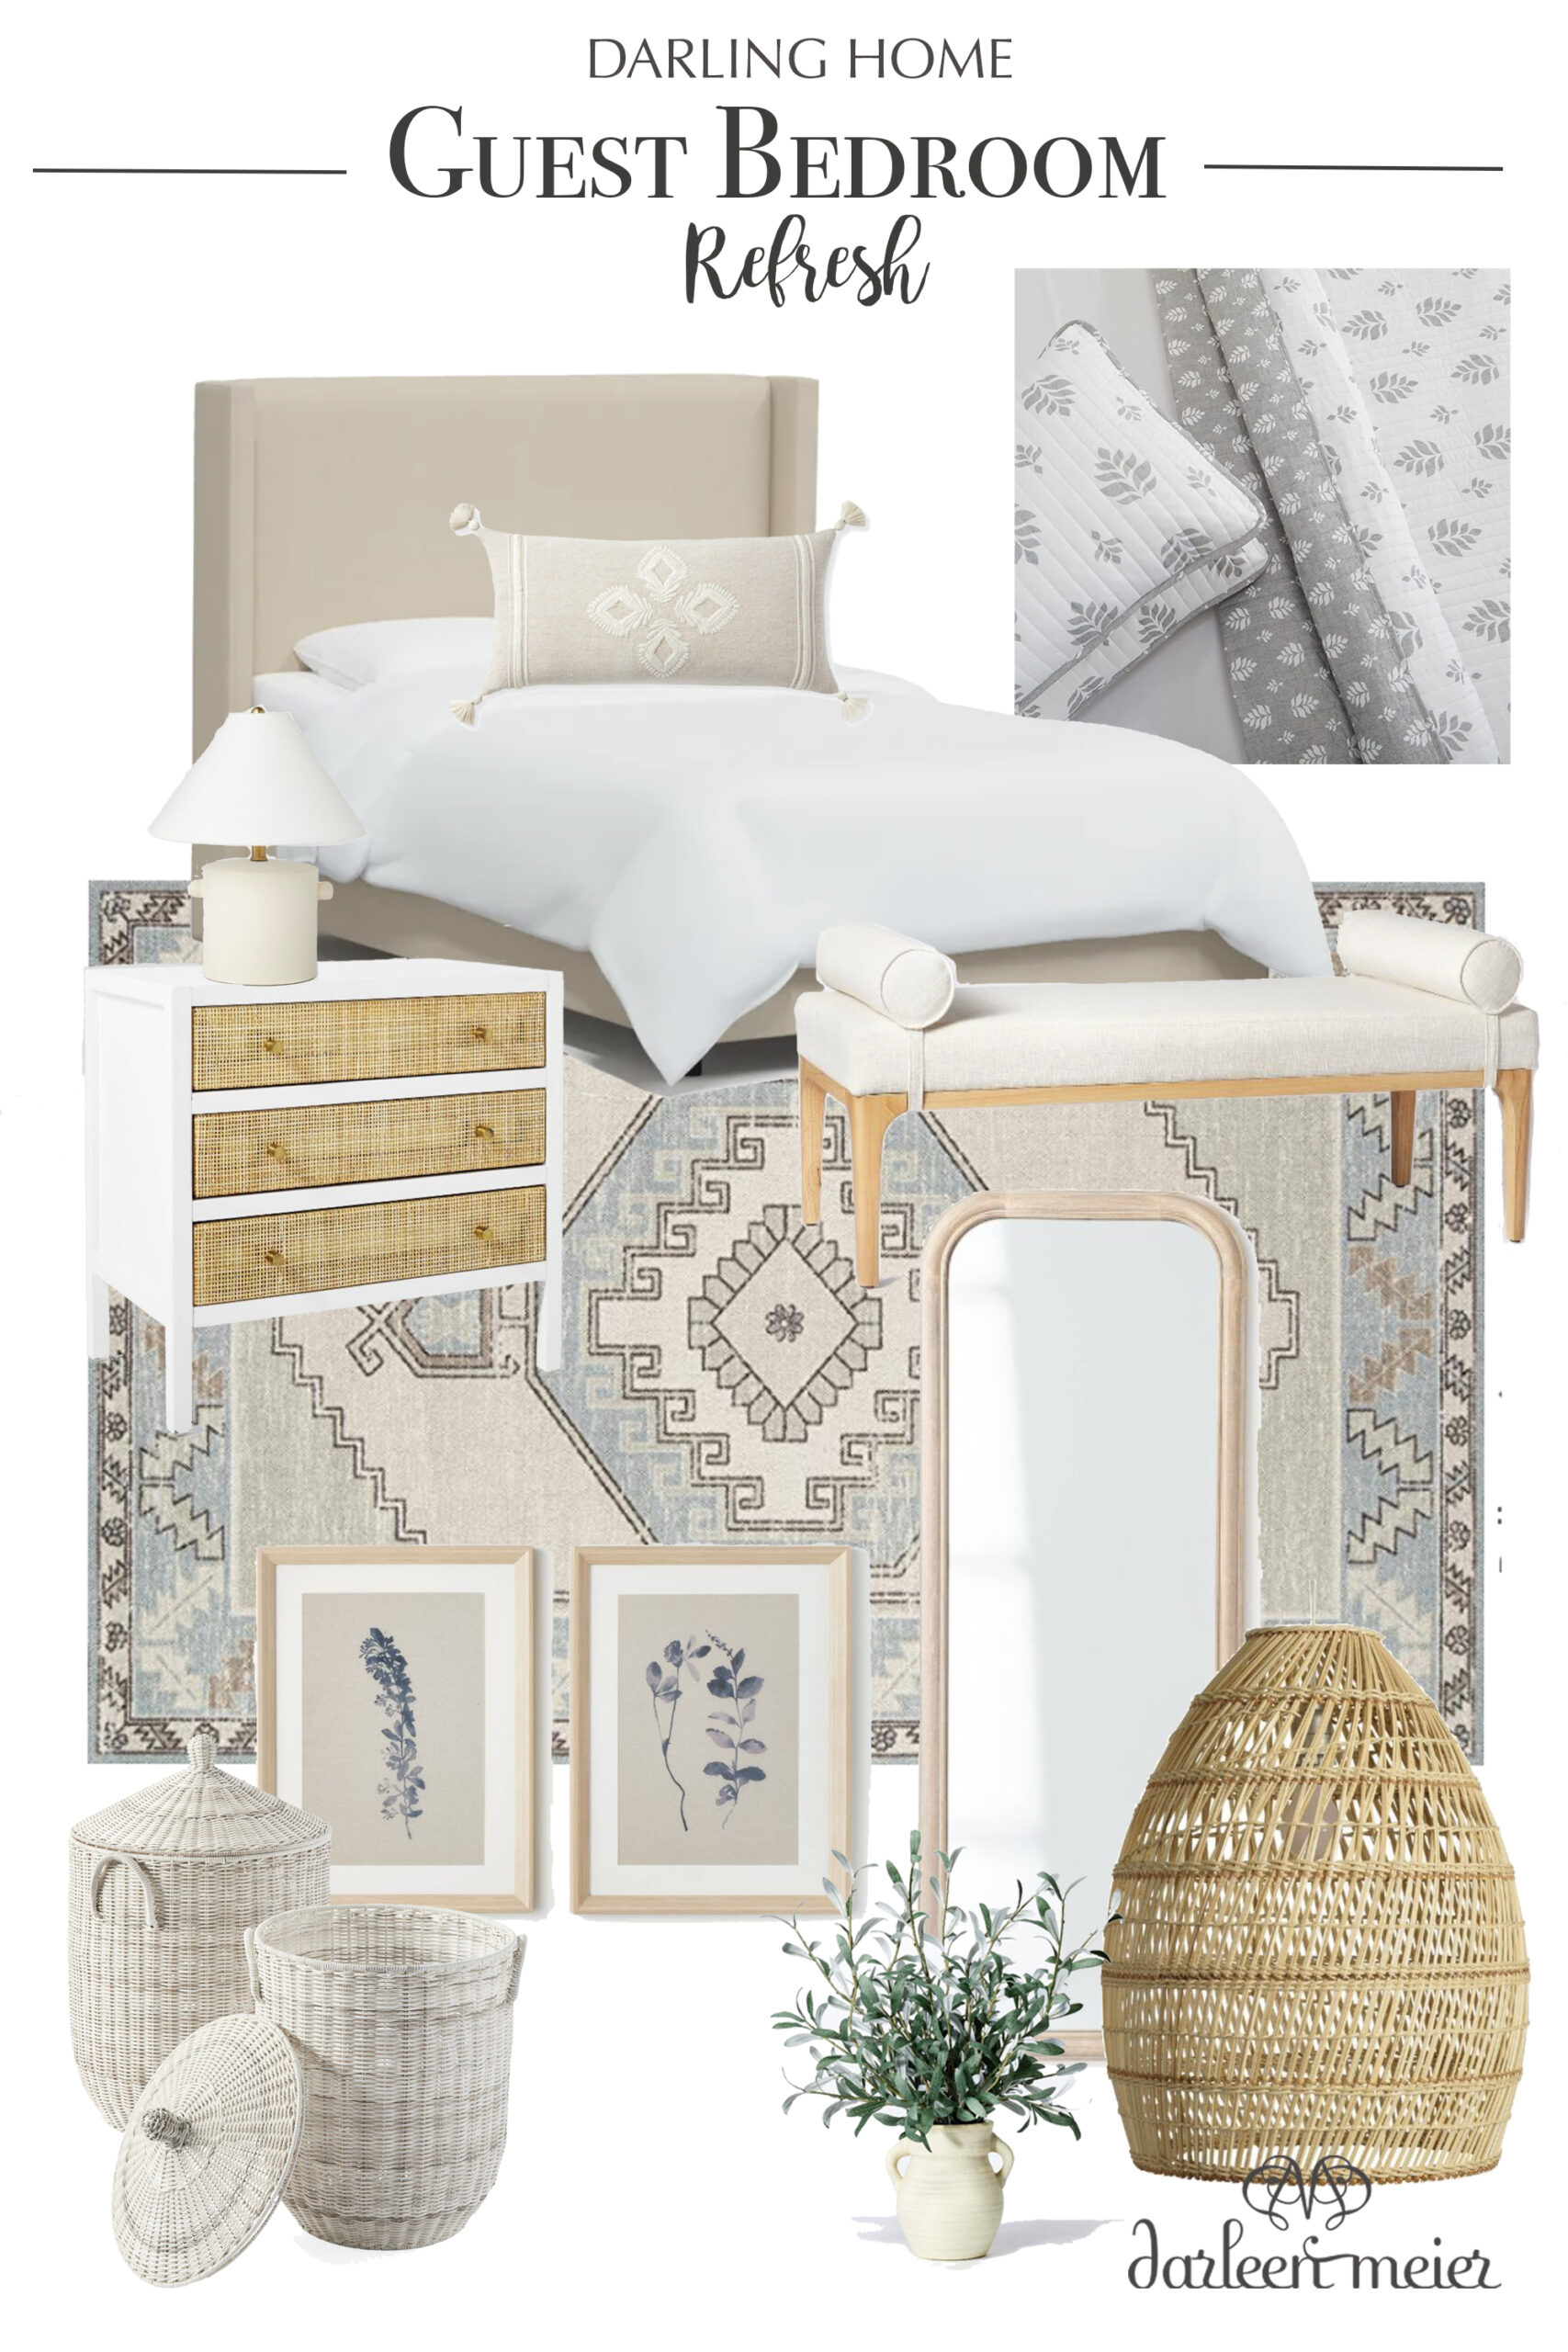 Guest Bedroom inspiration board that is cozy and inviting.  Perfect options for a coastal modern vibe with neutral colors of cane furniture. || Darling Darleen Top CT Lifestyle Blog